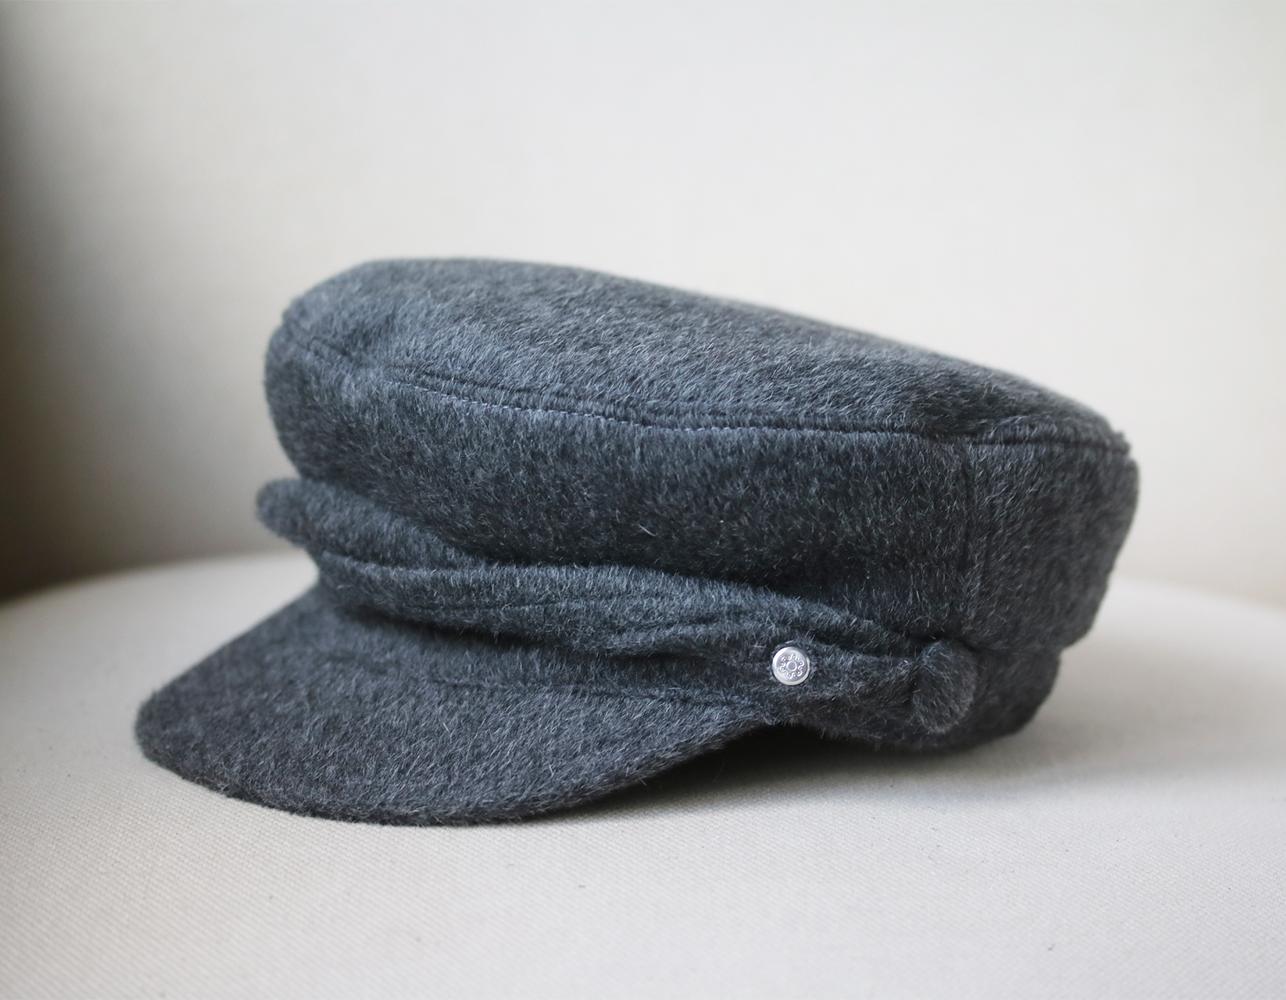 This Maison Michel hat is rendered in angora and wool blend. It features an edgy design and is accented with an embelishment band. Baker Boy Hat Silhouette. Unlined. 70% Angora, 30% Wool. Colour: Grey. Made in France. 

Size: Medium (Circumference -